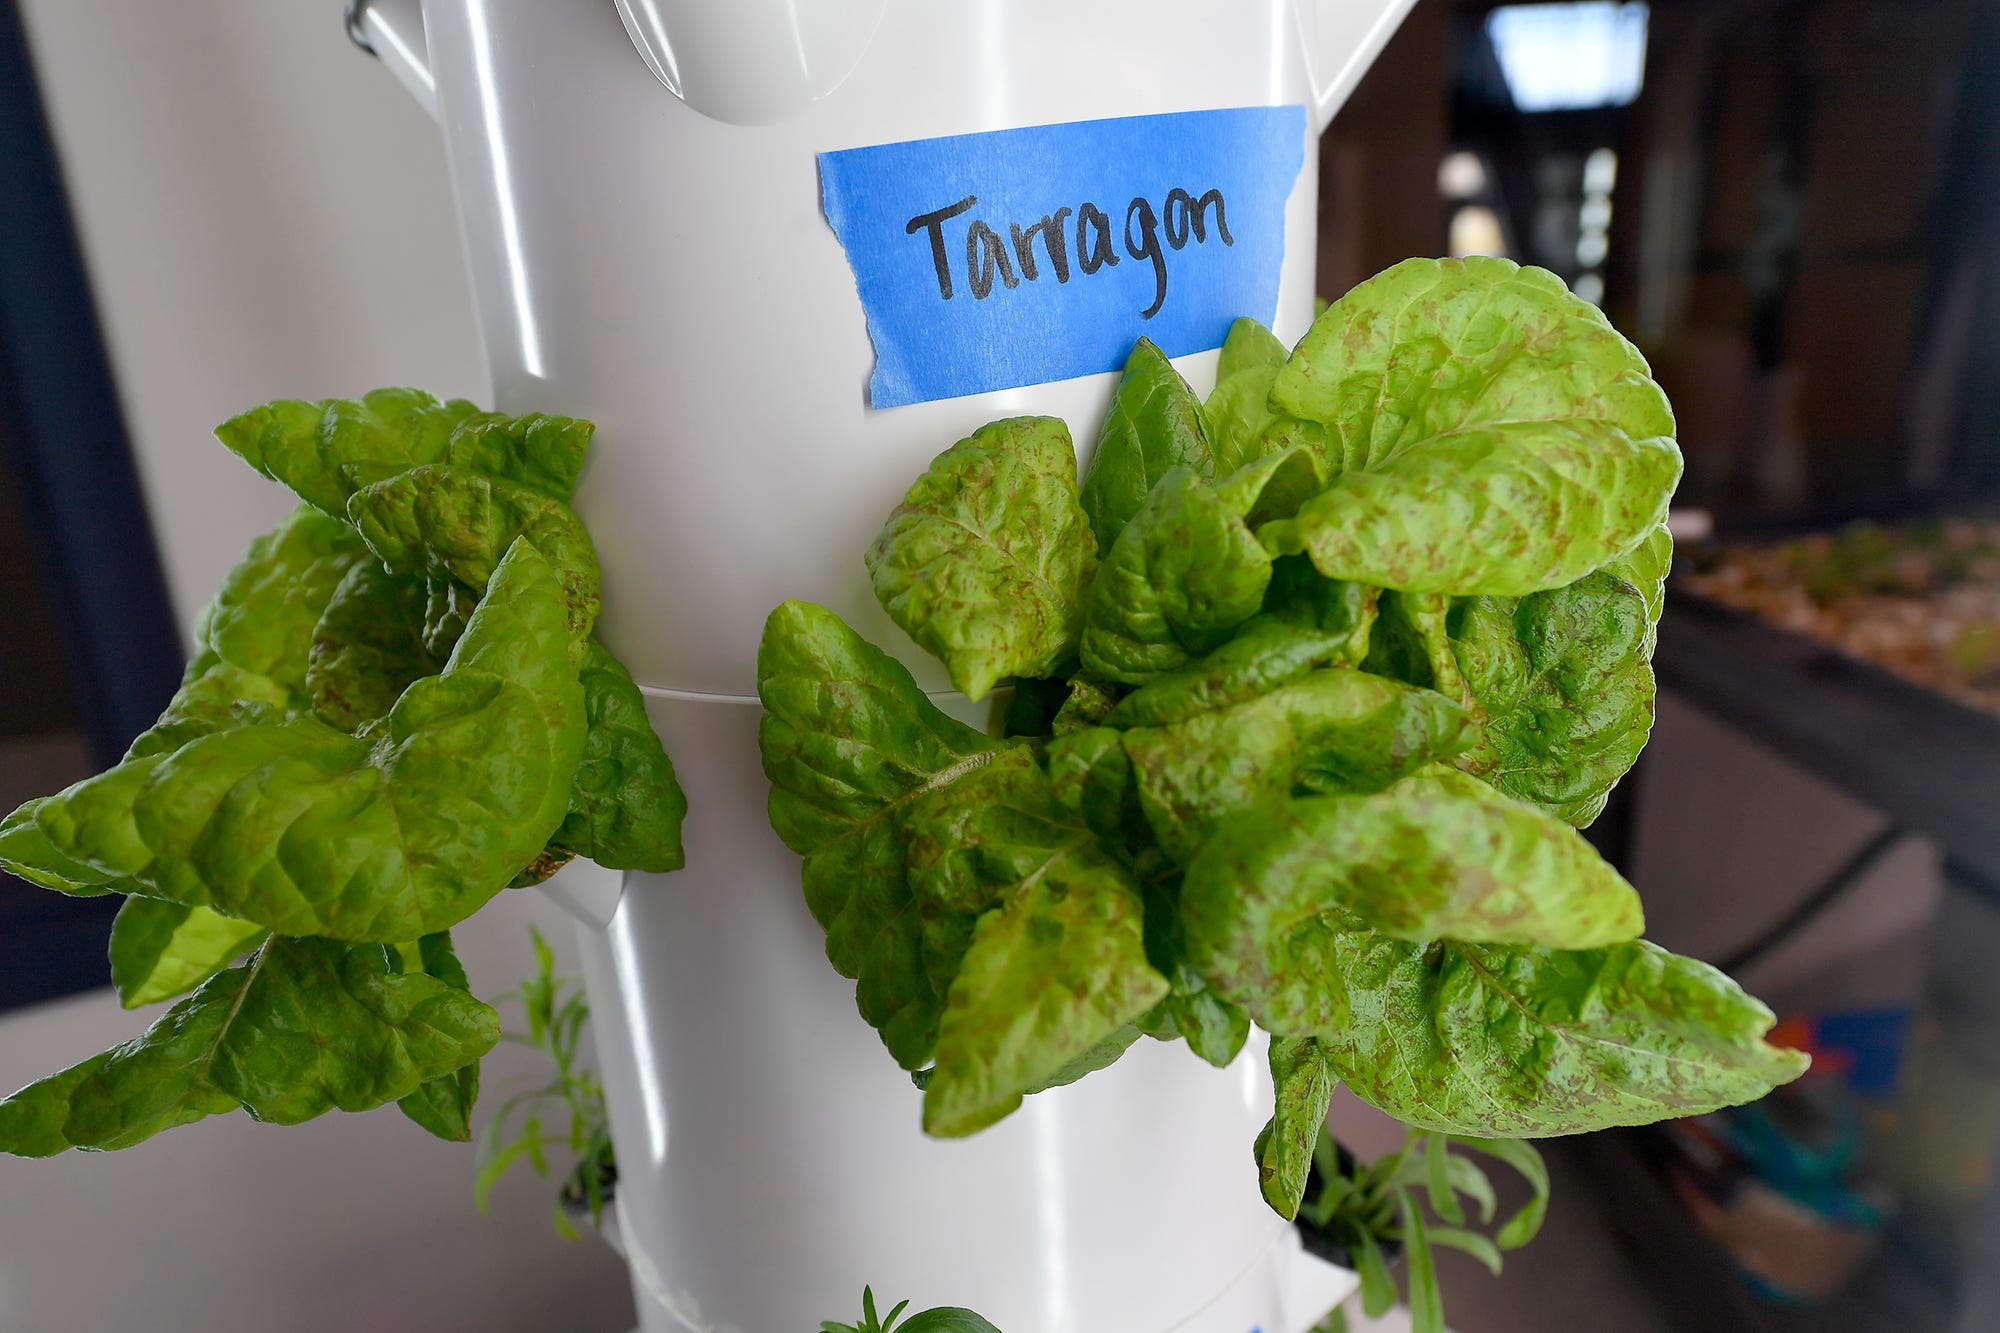 Taragon and other herbs are grown by students from West Shore School District at the Cedar Crest High School aquaponics lab, Tuesday, December 3, 2019
John A. Pavoncello photo